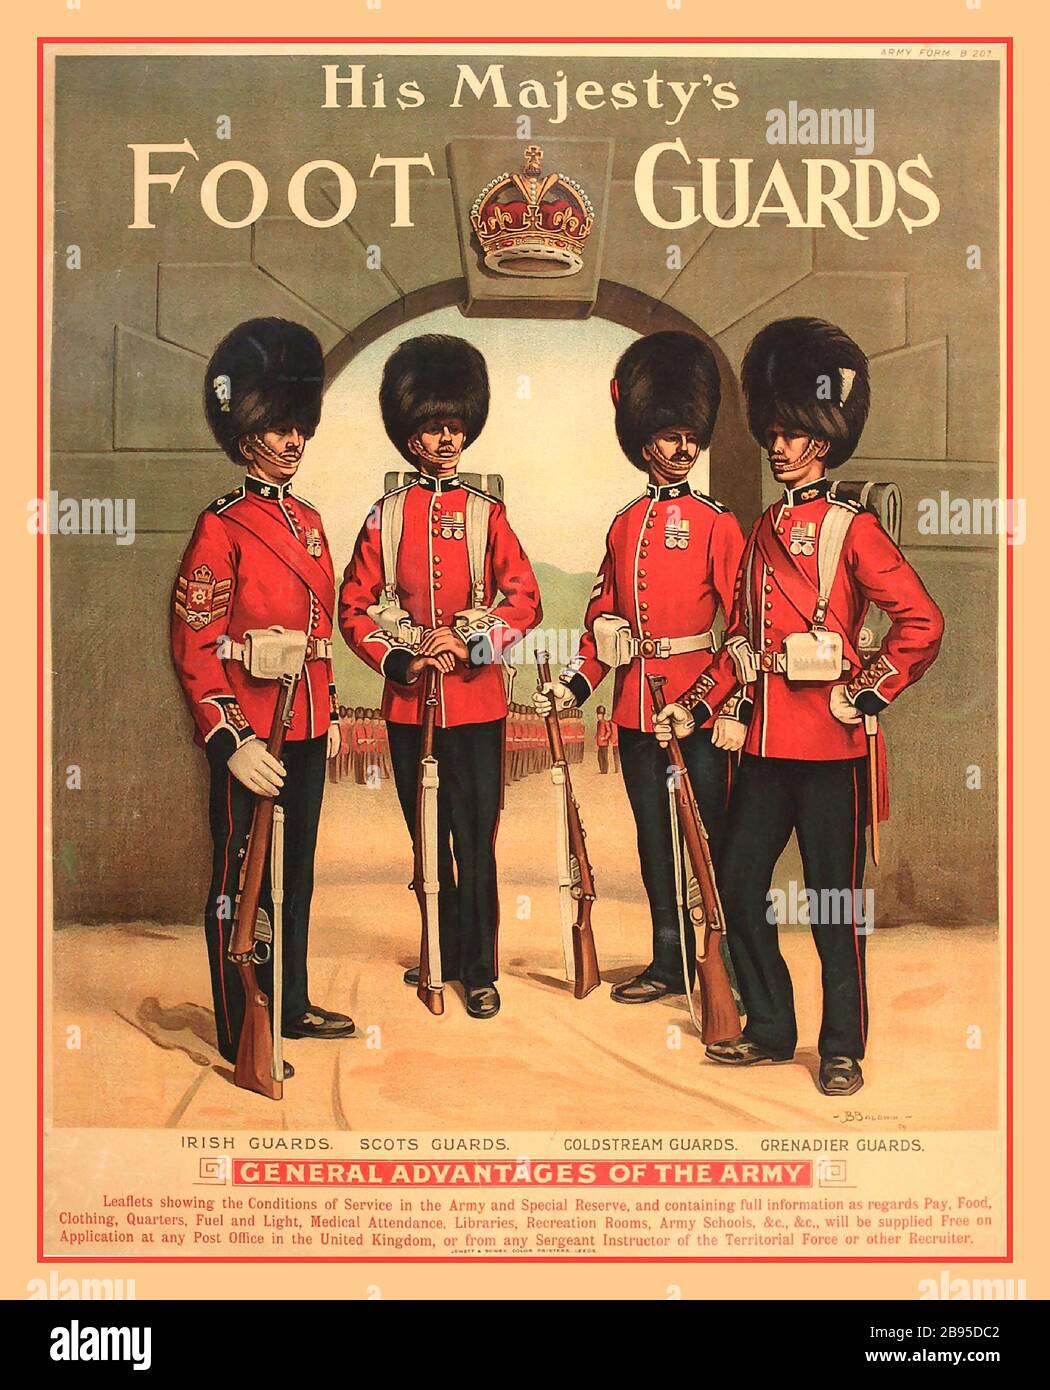 Vintage 1900's Recruiting Army Poster 'His Majesty's Foot Guards, Irish, Scots, Coldstream and Grenadier Guards', original Army Recruiting poster Army Form B207, printed by Jowett & Sowery 1909 by J B Baldwin Stock Photo